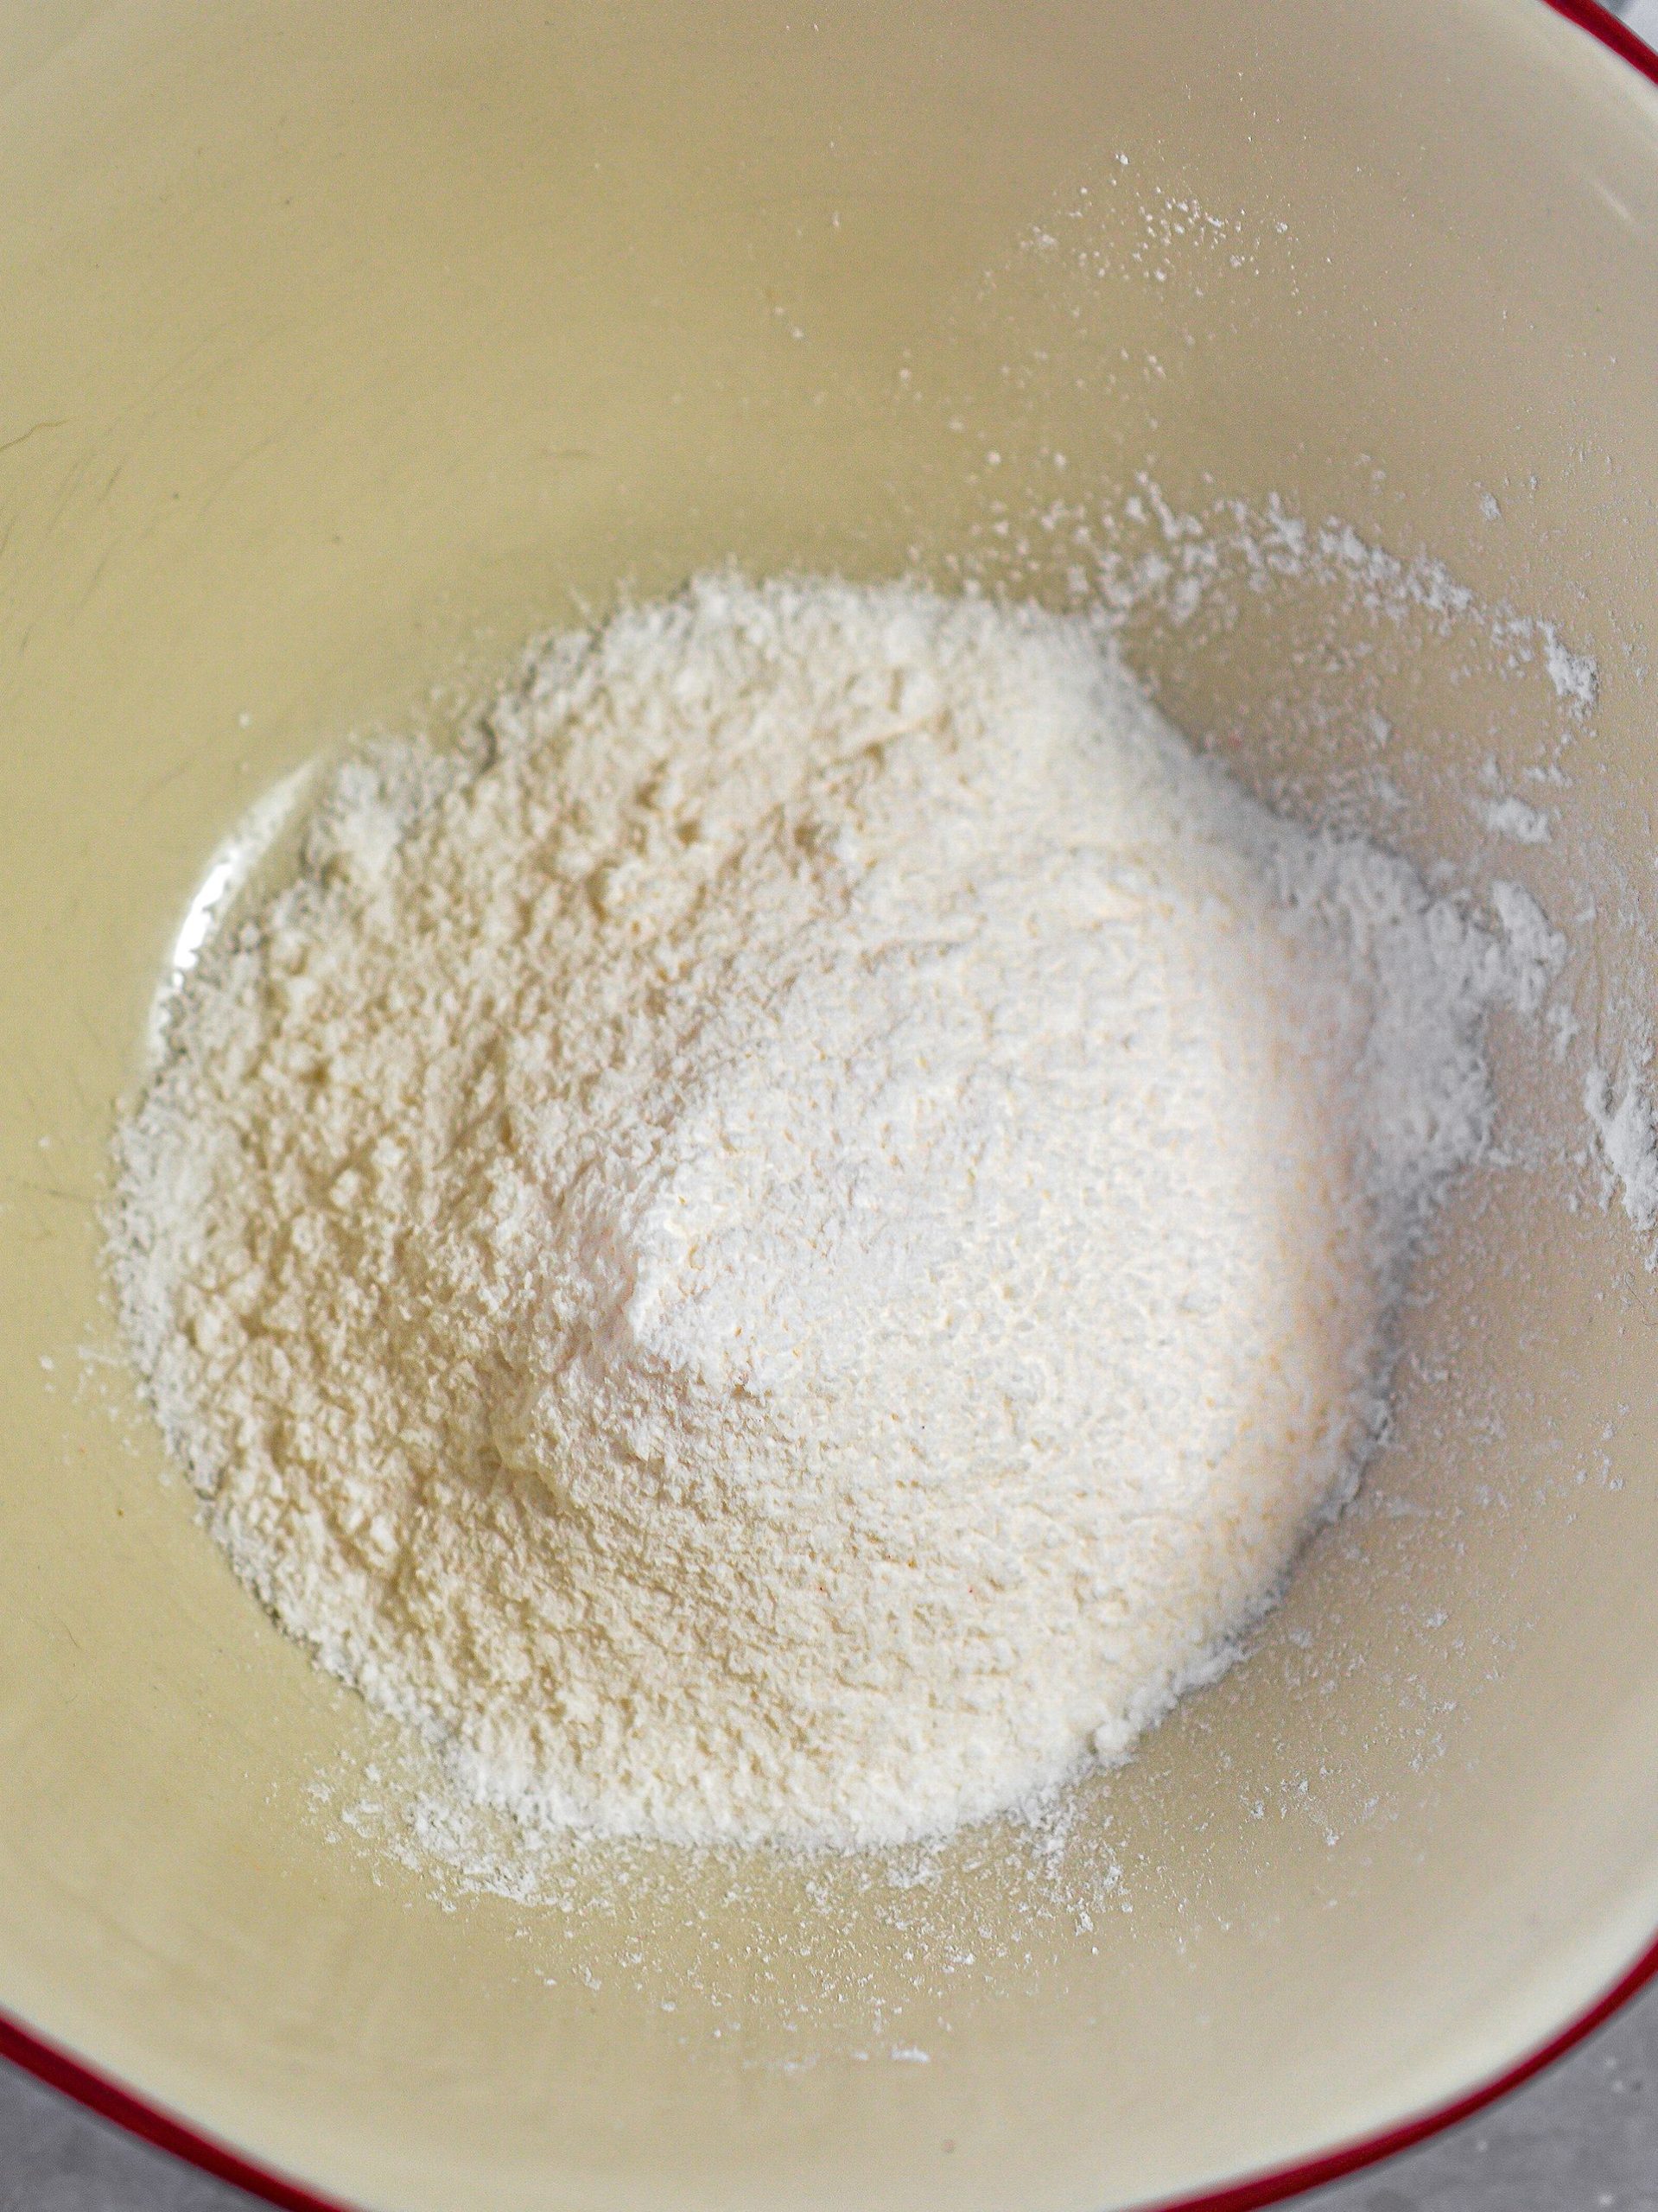 In a mixing bowl, blend together the cream cheese and sour cream until smooth.